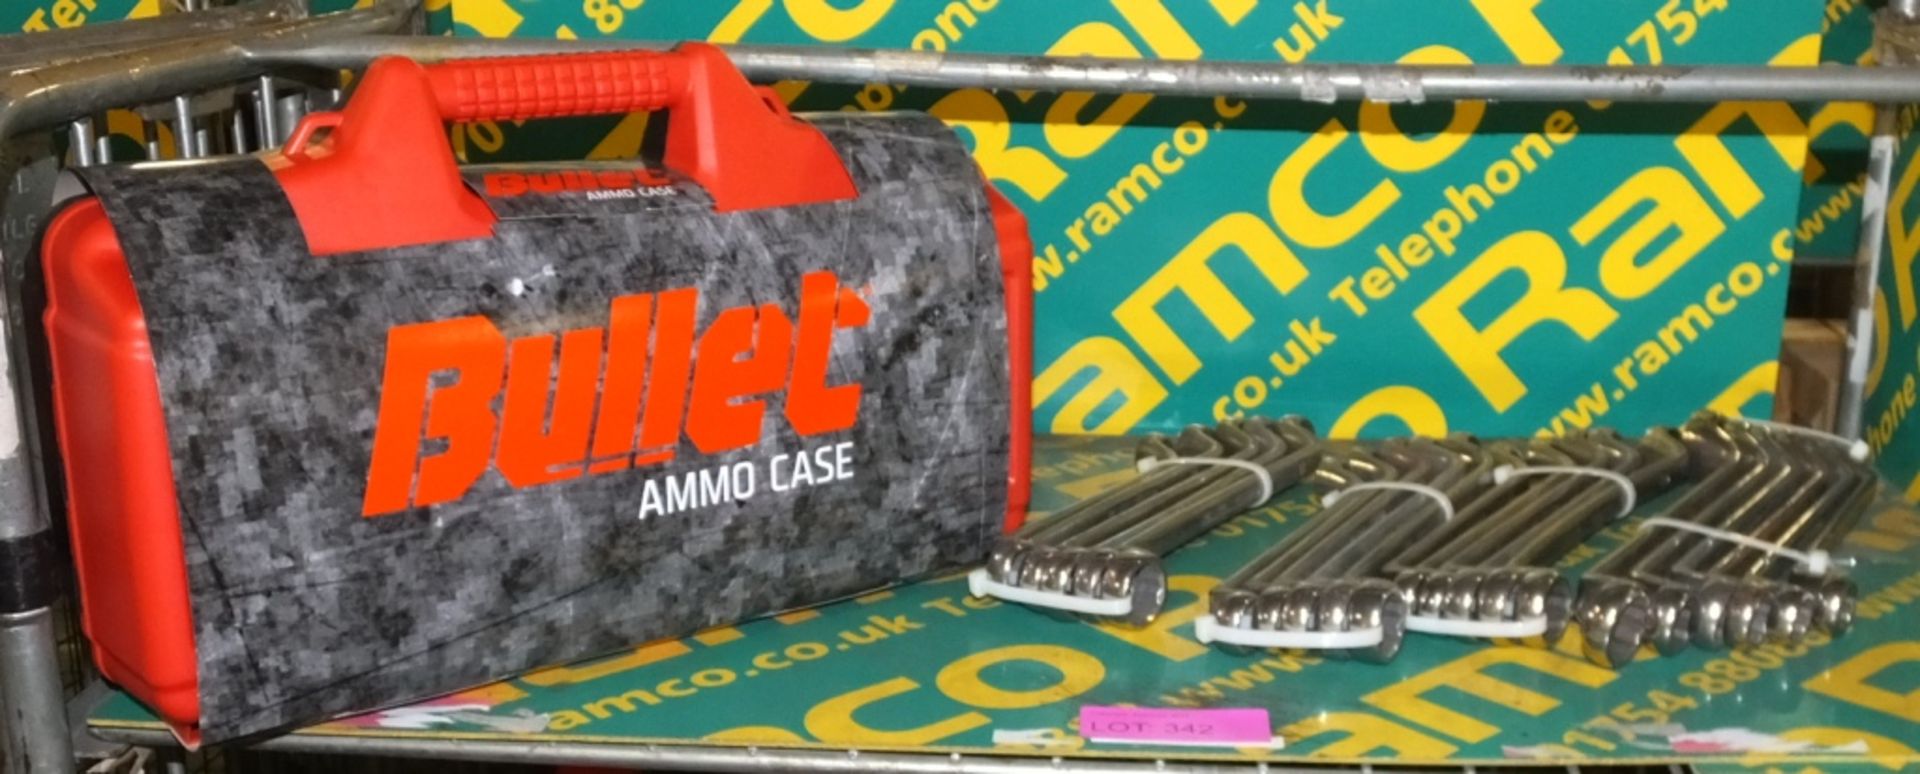 Bullet Ammo Tool case, Ring Spanners